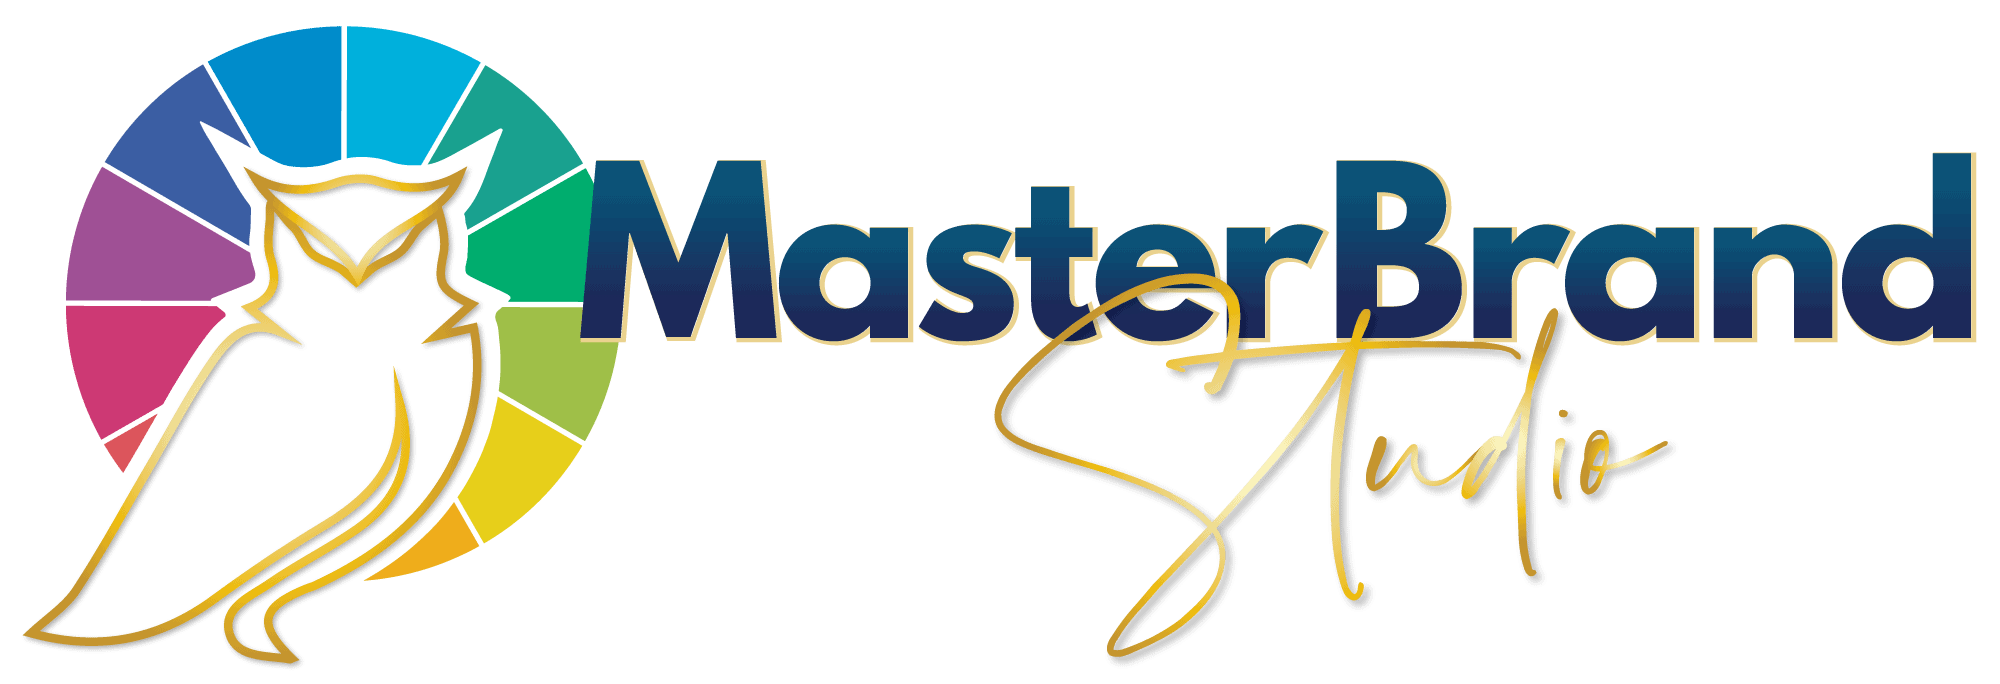 MasterBrand Studio help small businesses get more customers Brian Roes logo on white horizontal